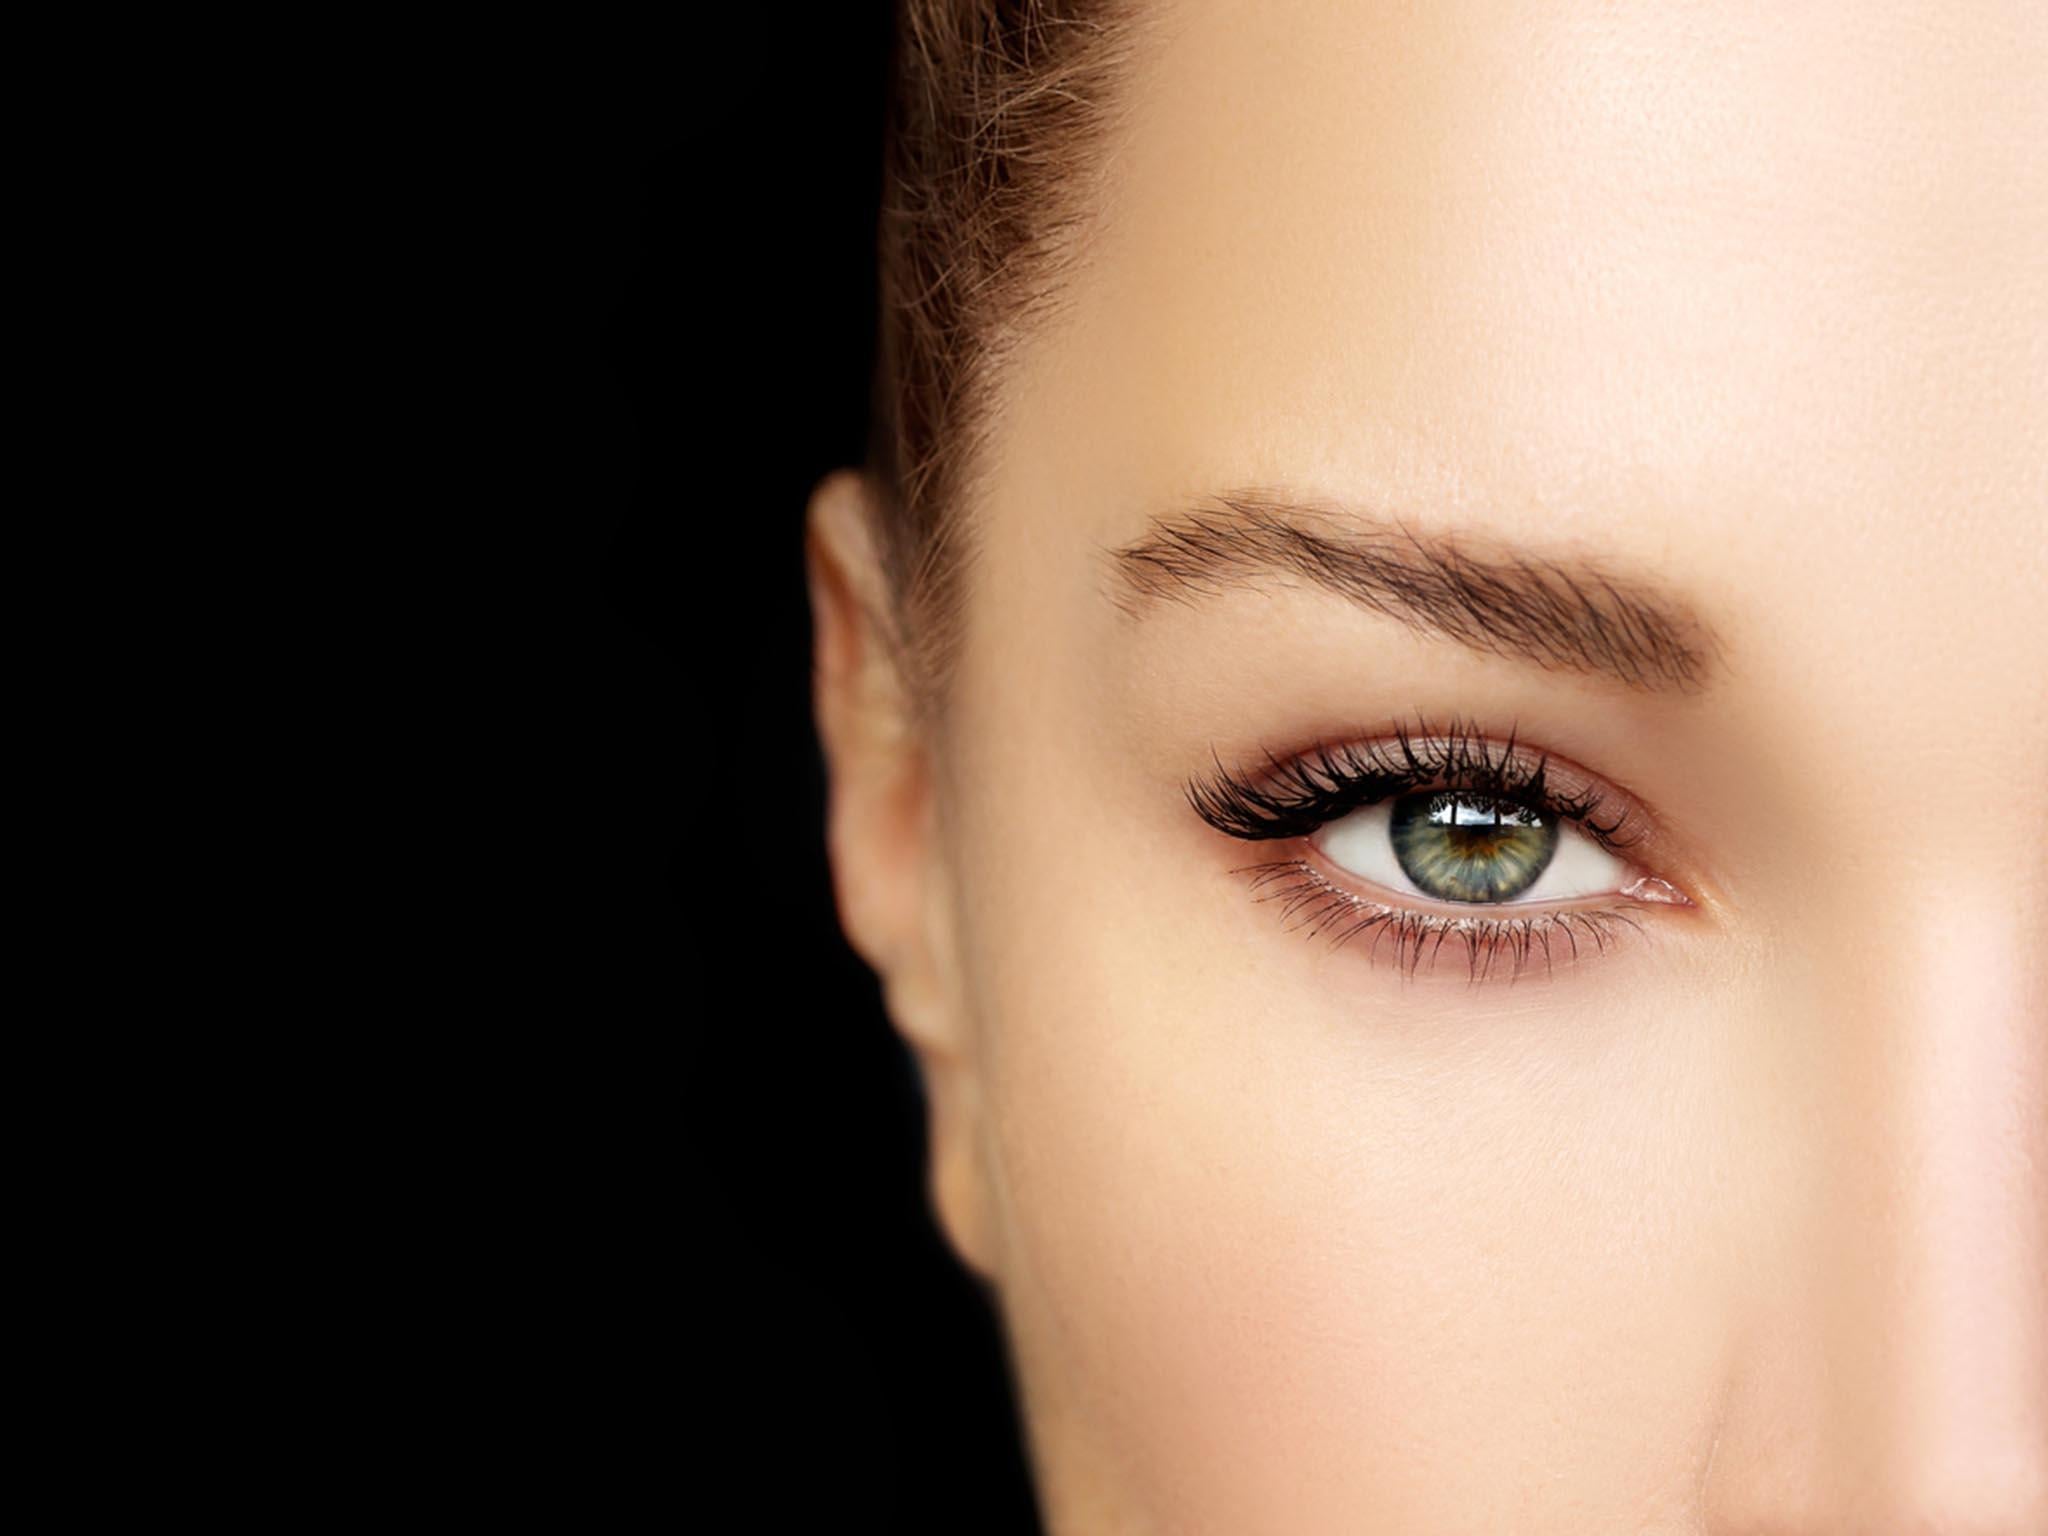 Curling your lashes might seem simple but there’s a strategy to it that’s easy to get wrong